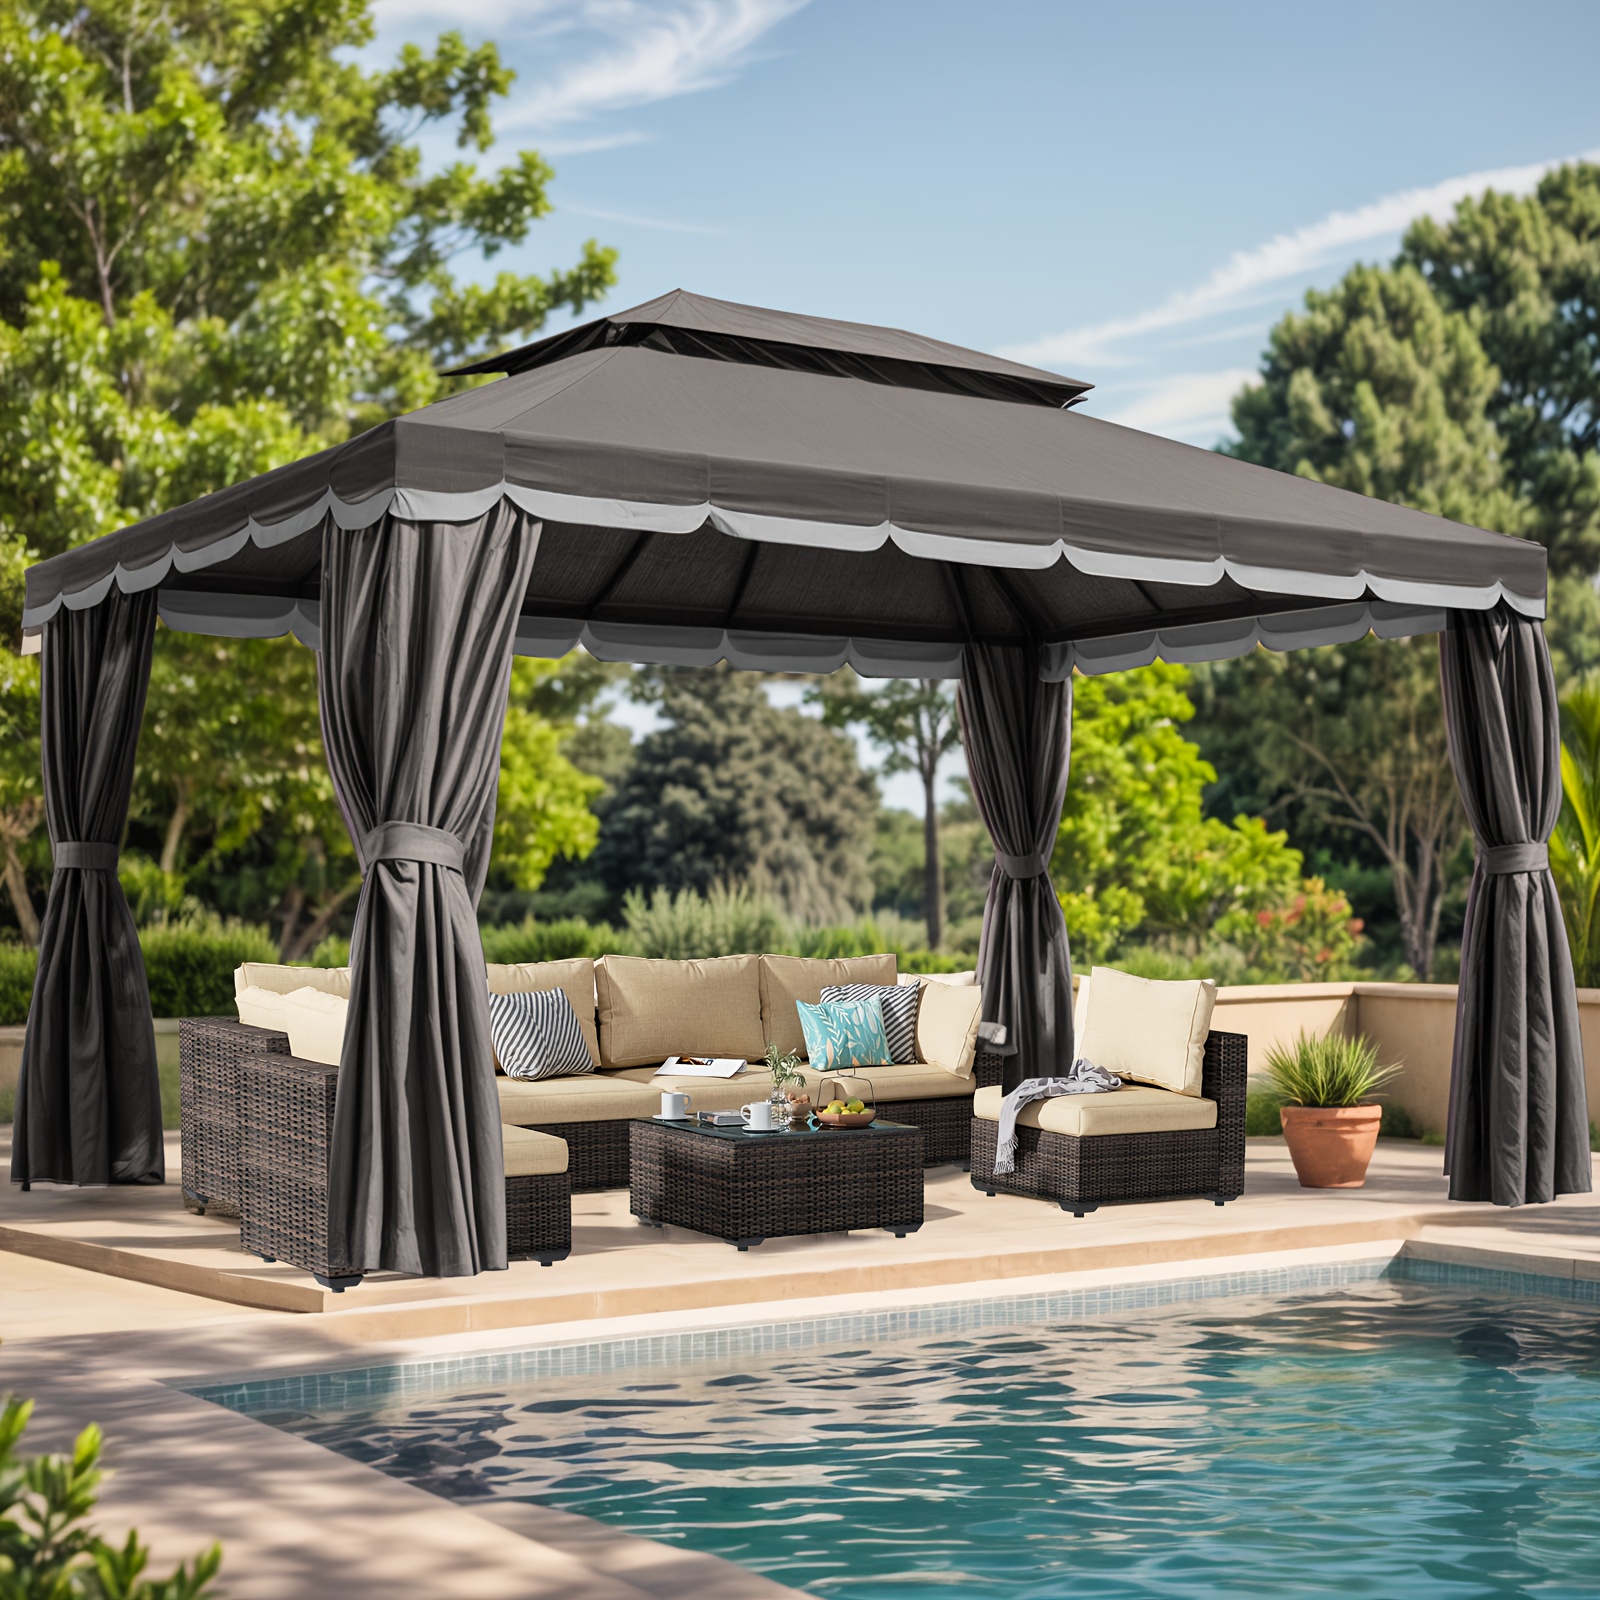 

10'x13' Outdoor Patio Gazebo, Heavy Duty Party Tent & Shelter With Double Roofs, Mosquito Nettings And Curtains For Backyard, Patio, Deck, Parties, Garden, Lawn